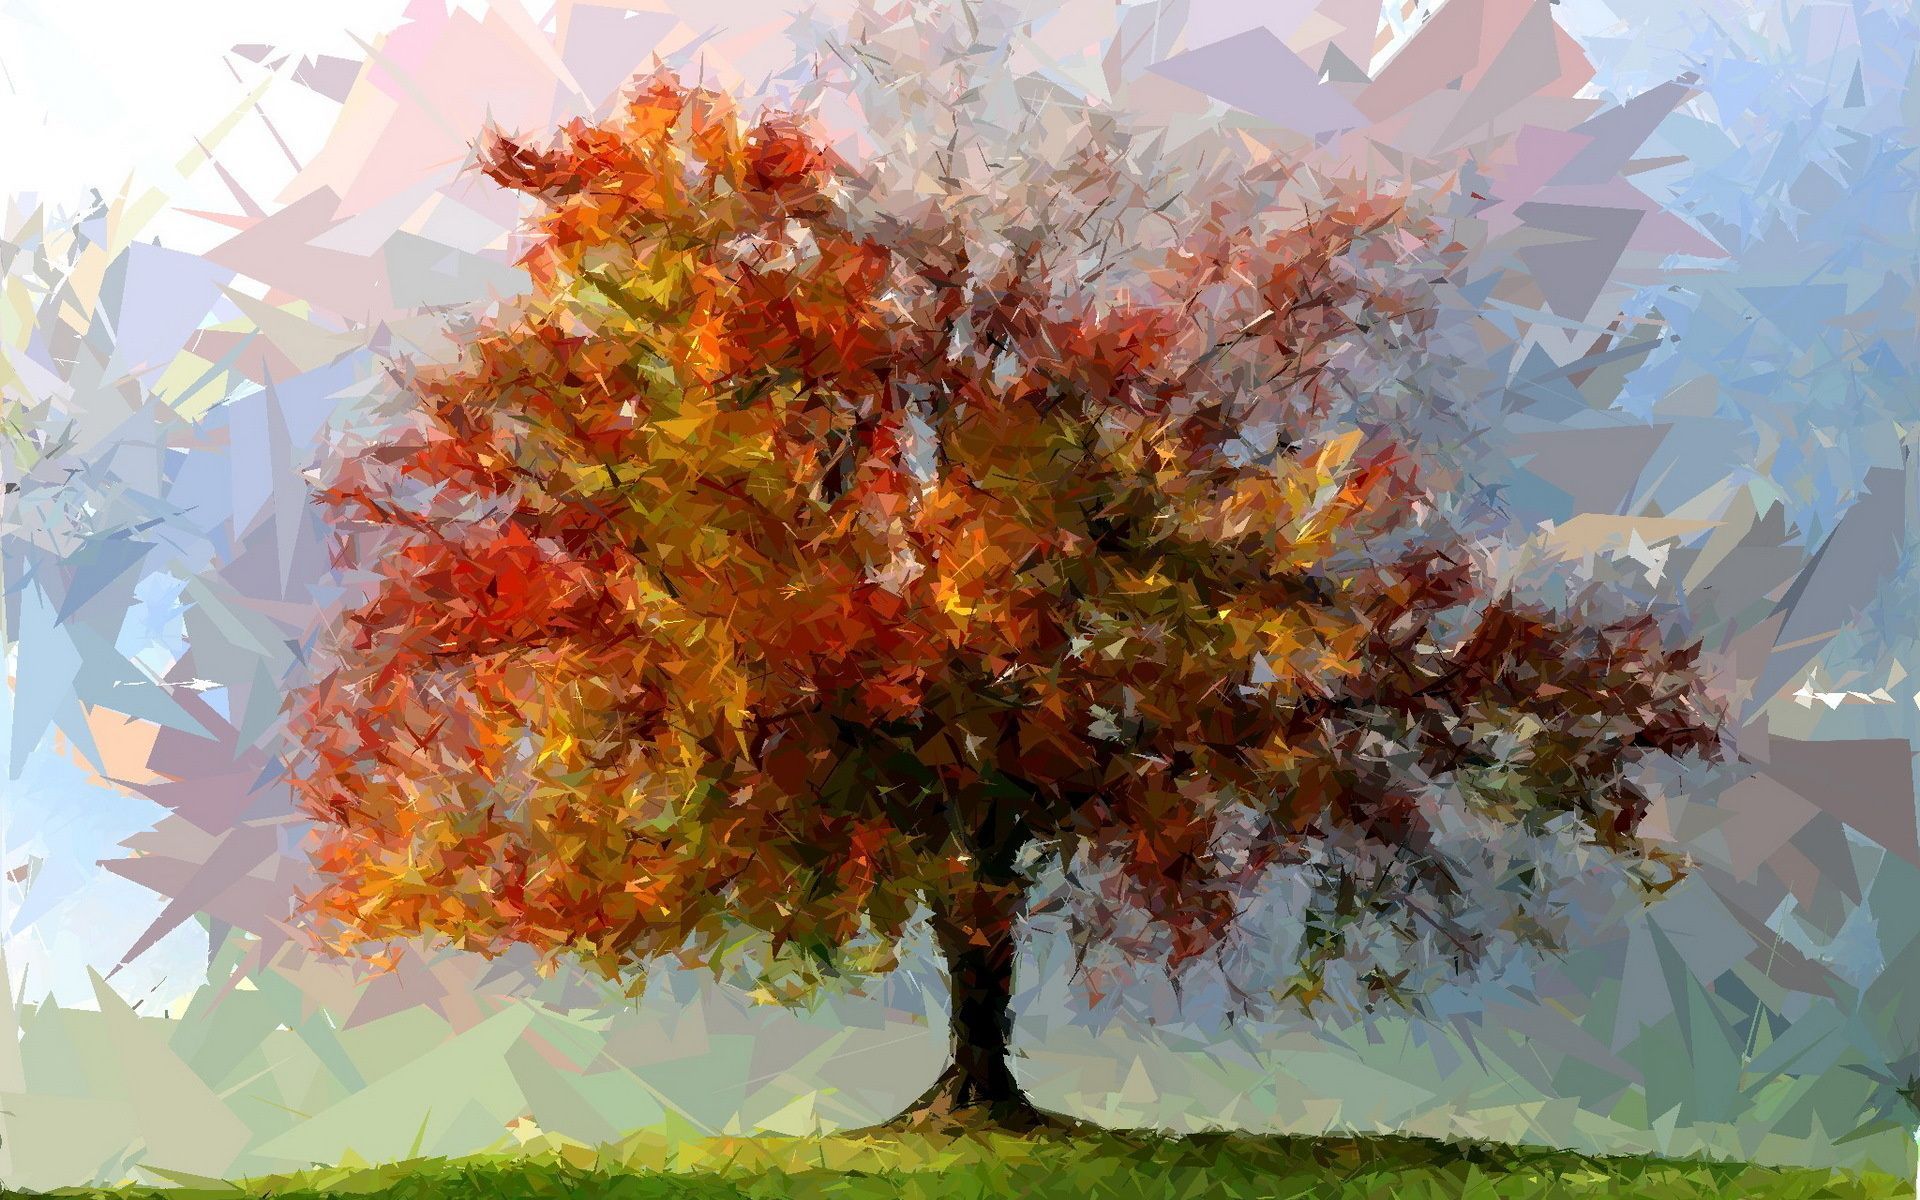 Trees And Grass Digital Art Wallpapers